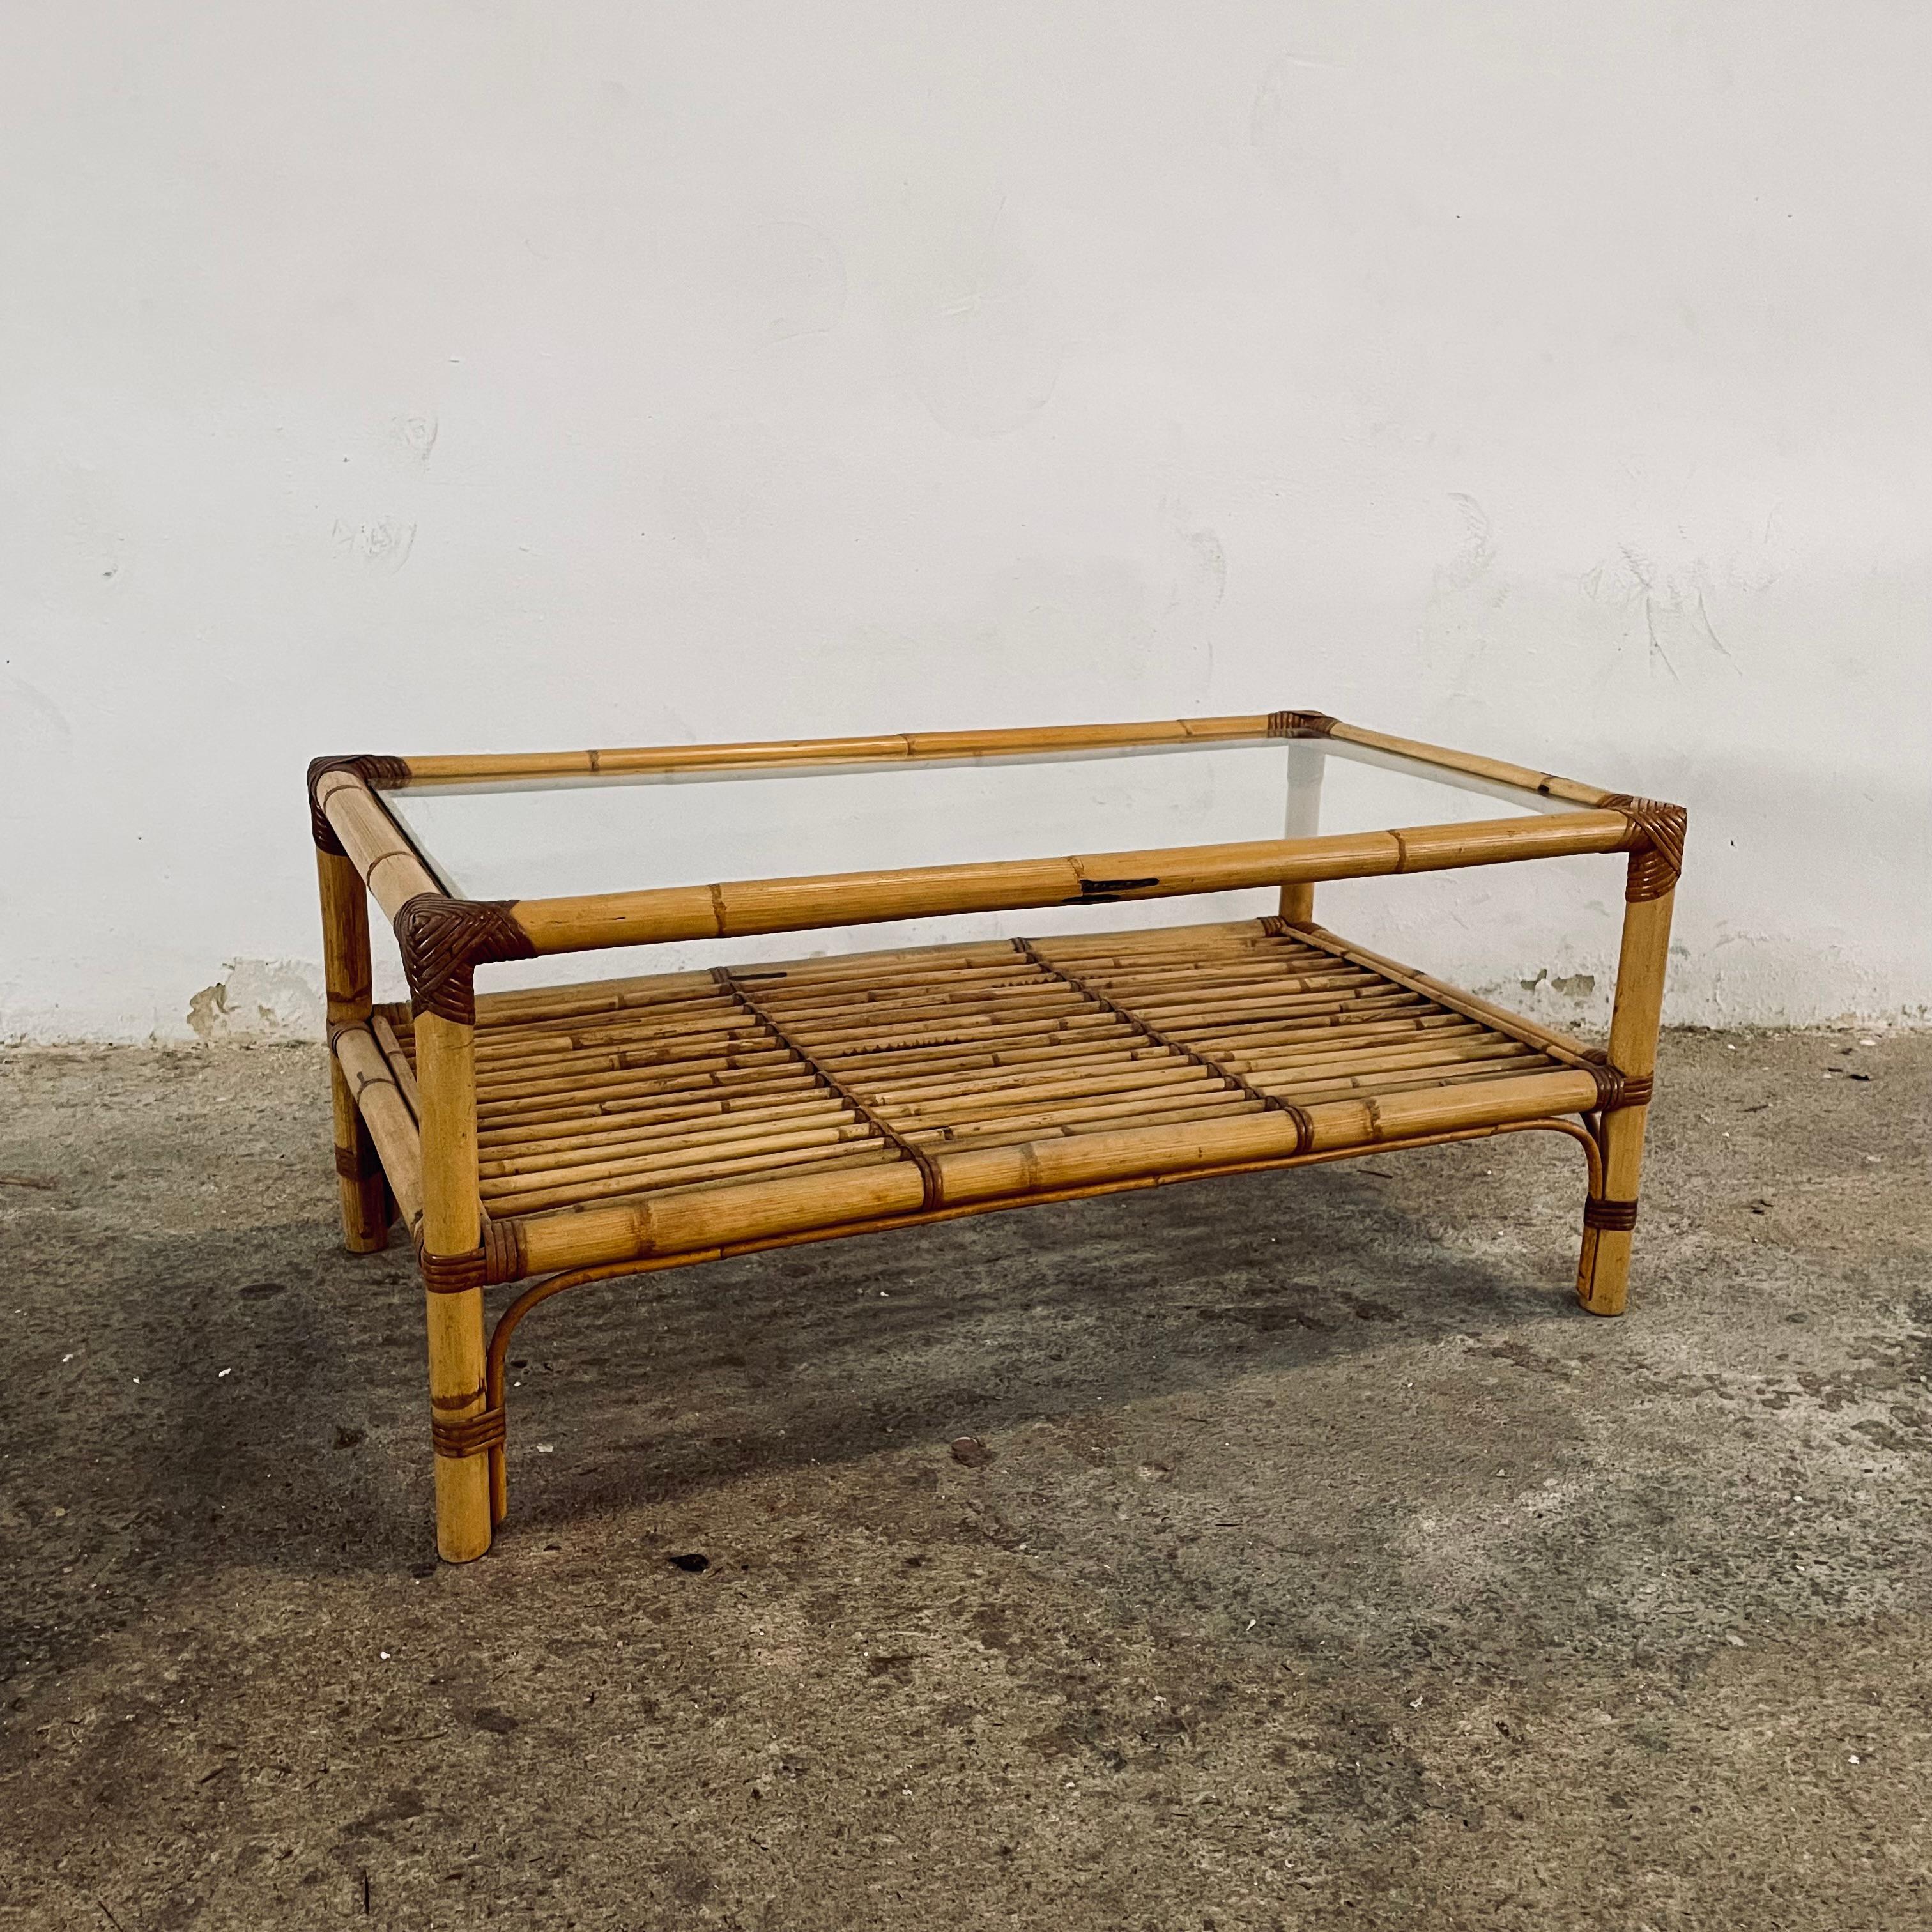 Gorgeous 1970s French bamboo and rattan coffee table or side table with glass top, two tiers or shelves with planty of display and storage space.
This vintage item remains fully functional, it may show signs of age through minor scuffs, dings,